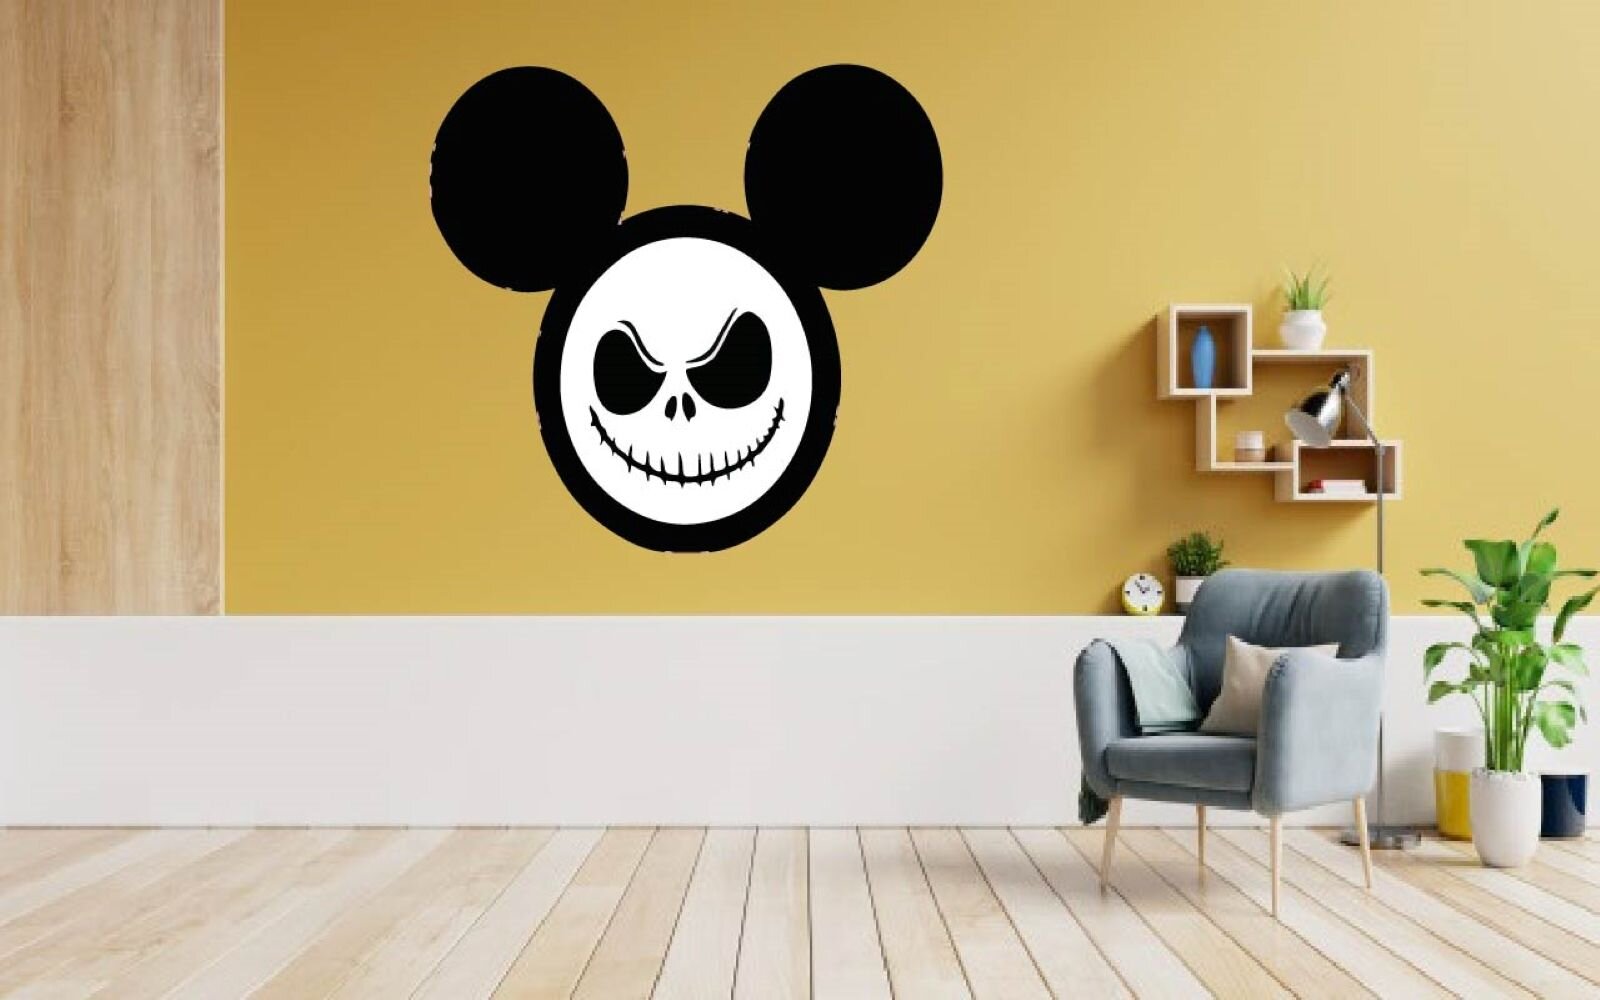 Decal Living Room Vinyl Kitchen Bedroom Teenager Zombie Outbreak Keep Out Wall Decal Sticker Wall Art Door Home Decor